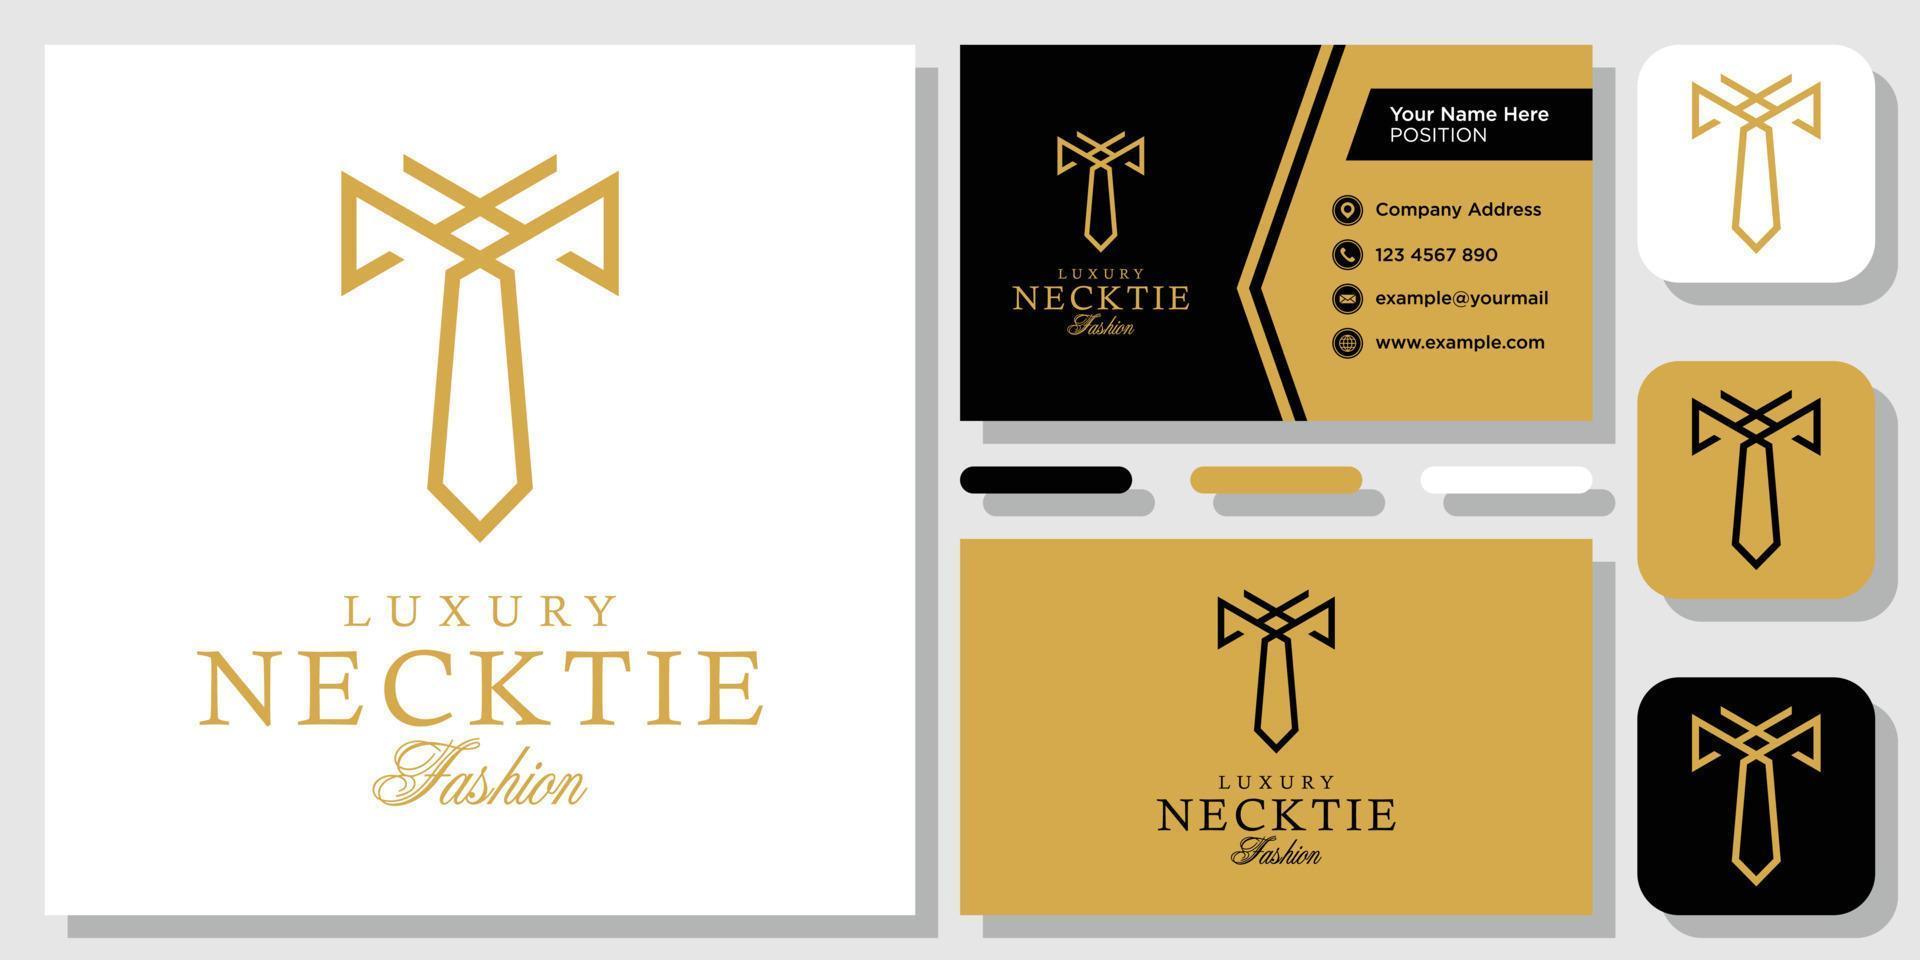 Luxury Necktie Clothes Man Fashion Tuxedo Tie Tailor logo design inspiration with Layout Template Business Card vector